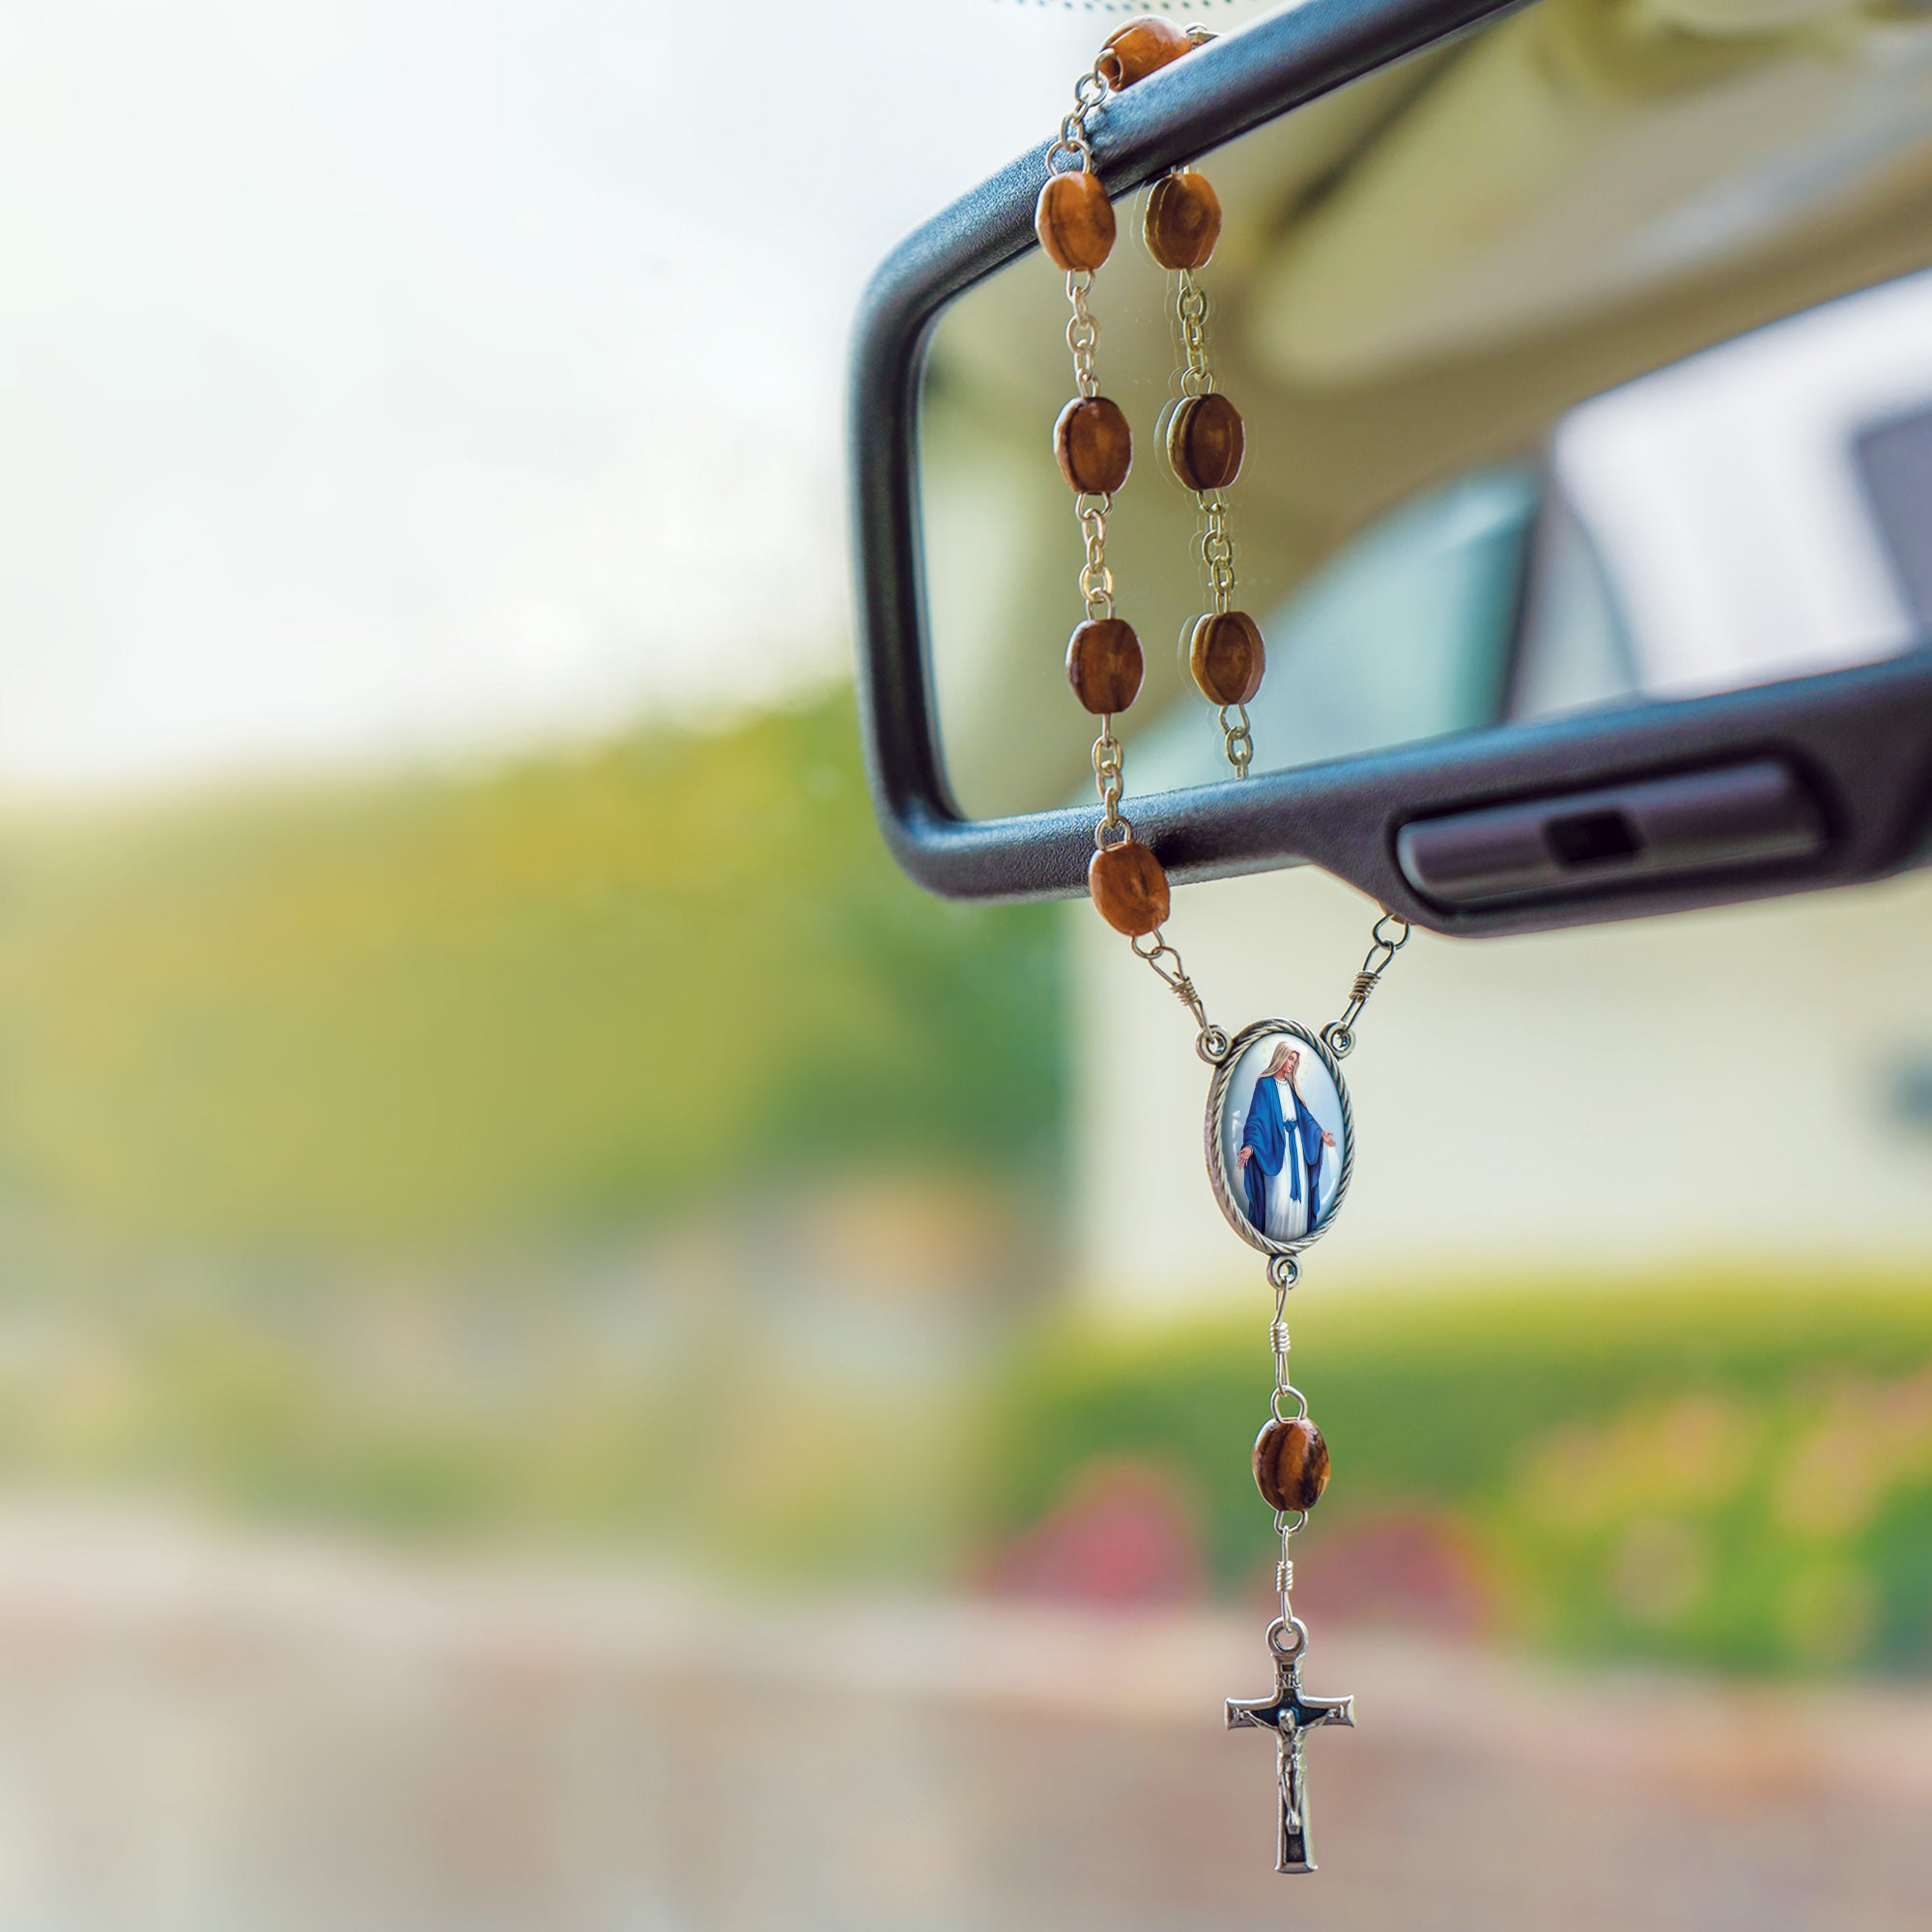 Our Lady of Grace, Holy Land Olive Wood Pocket Auto Rosary, Made in Bethlehem on rearview mirror